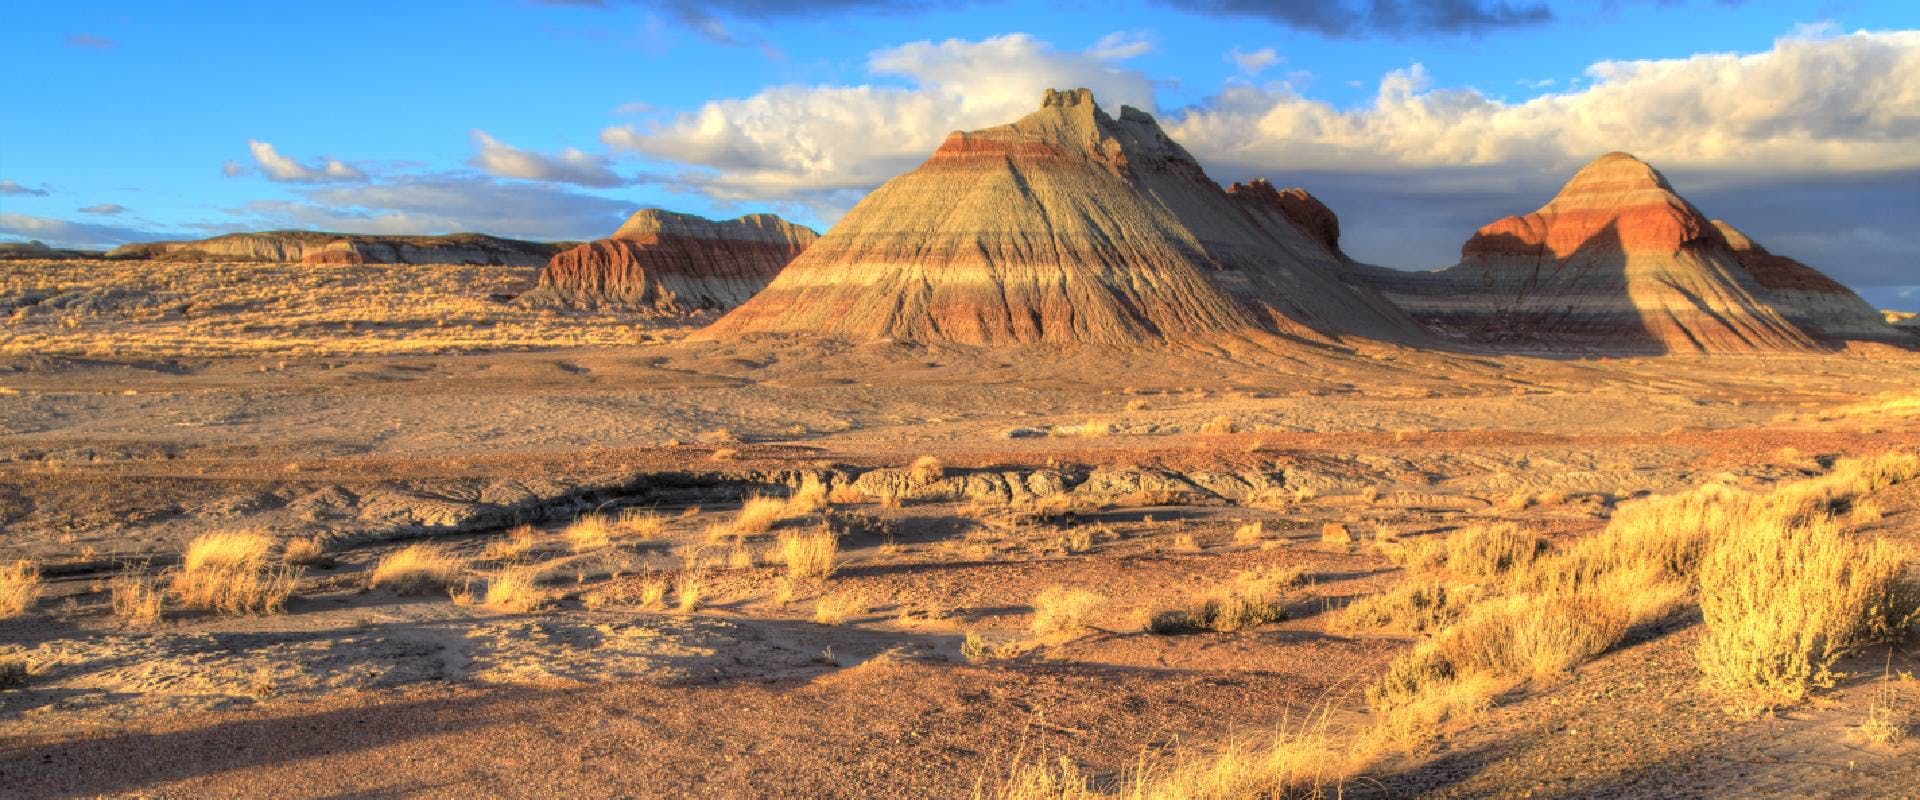 Petrified Forest National Park 